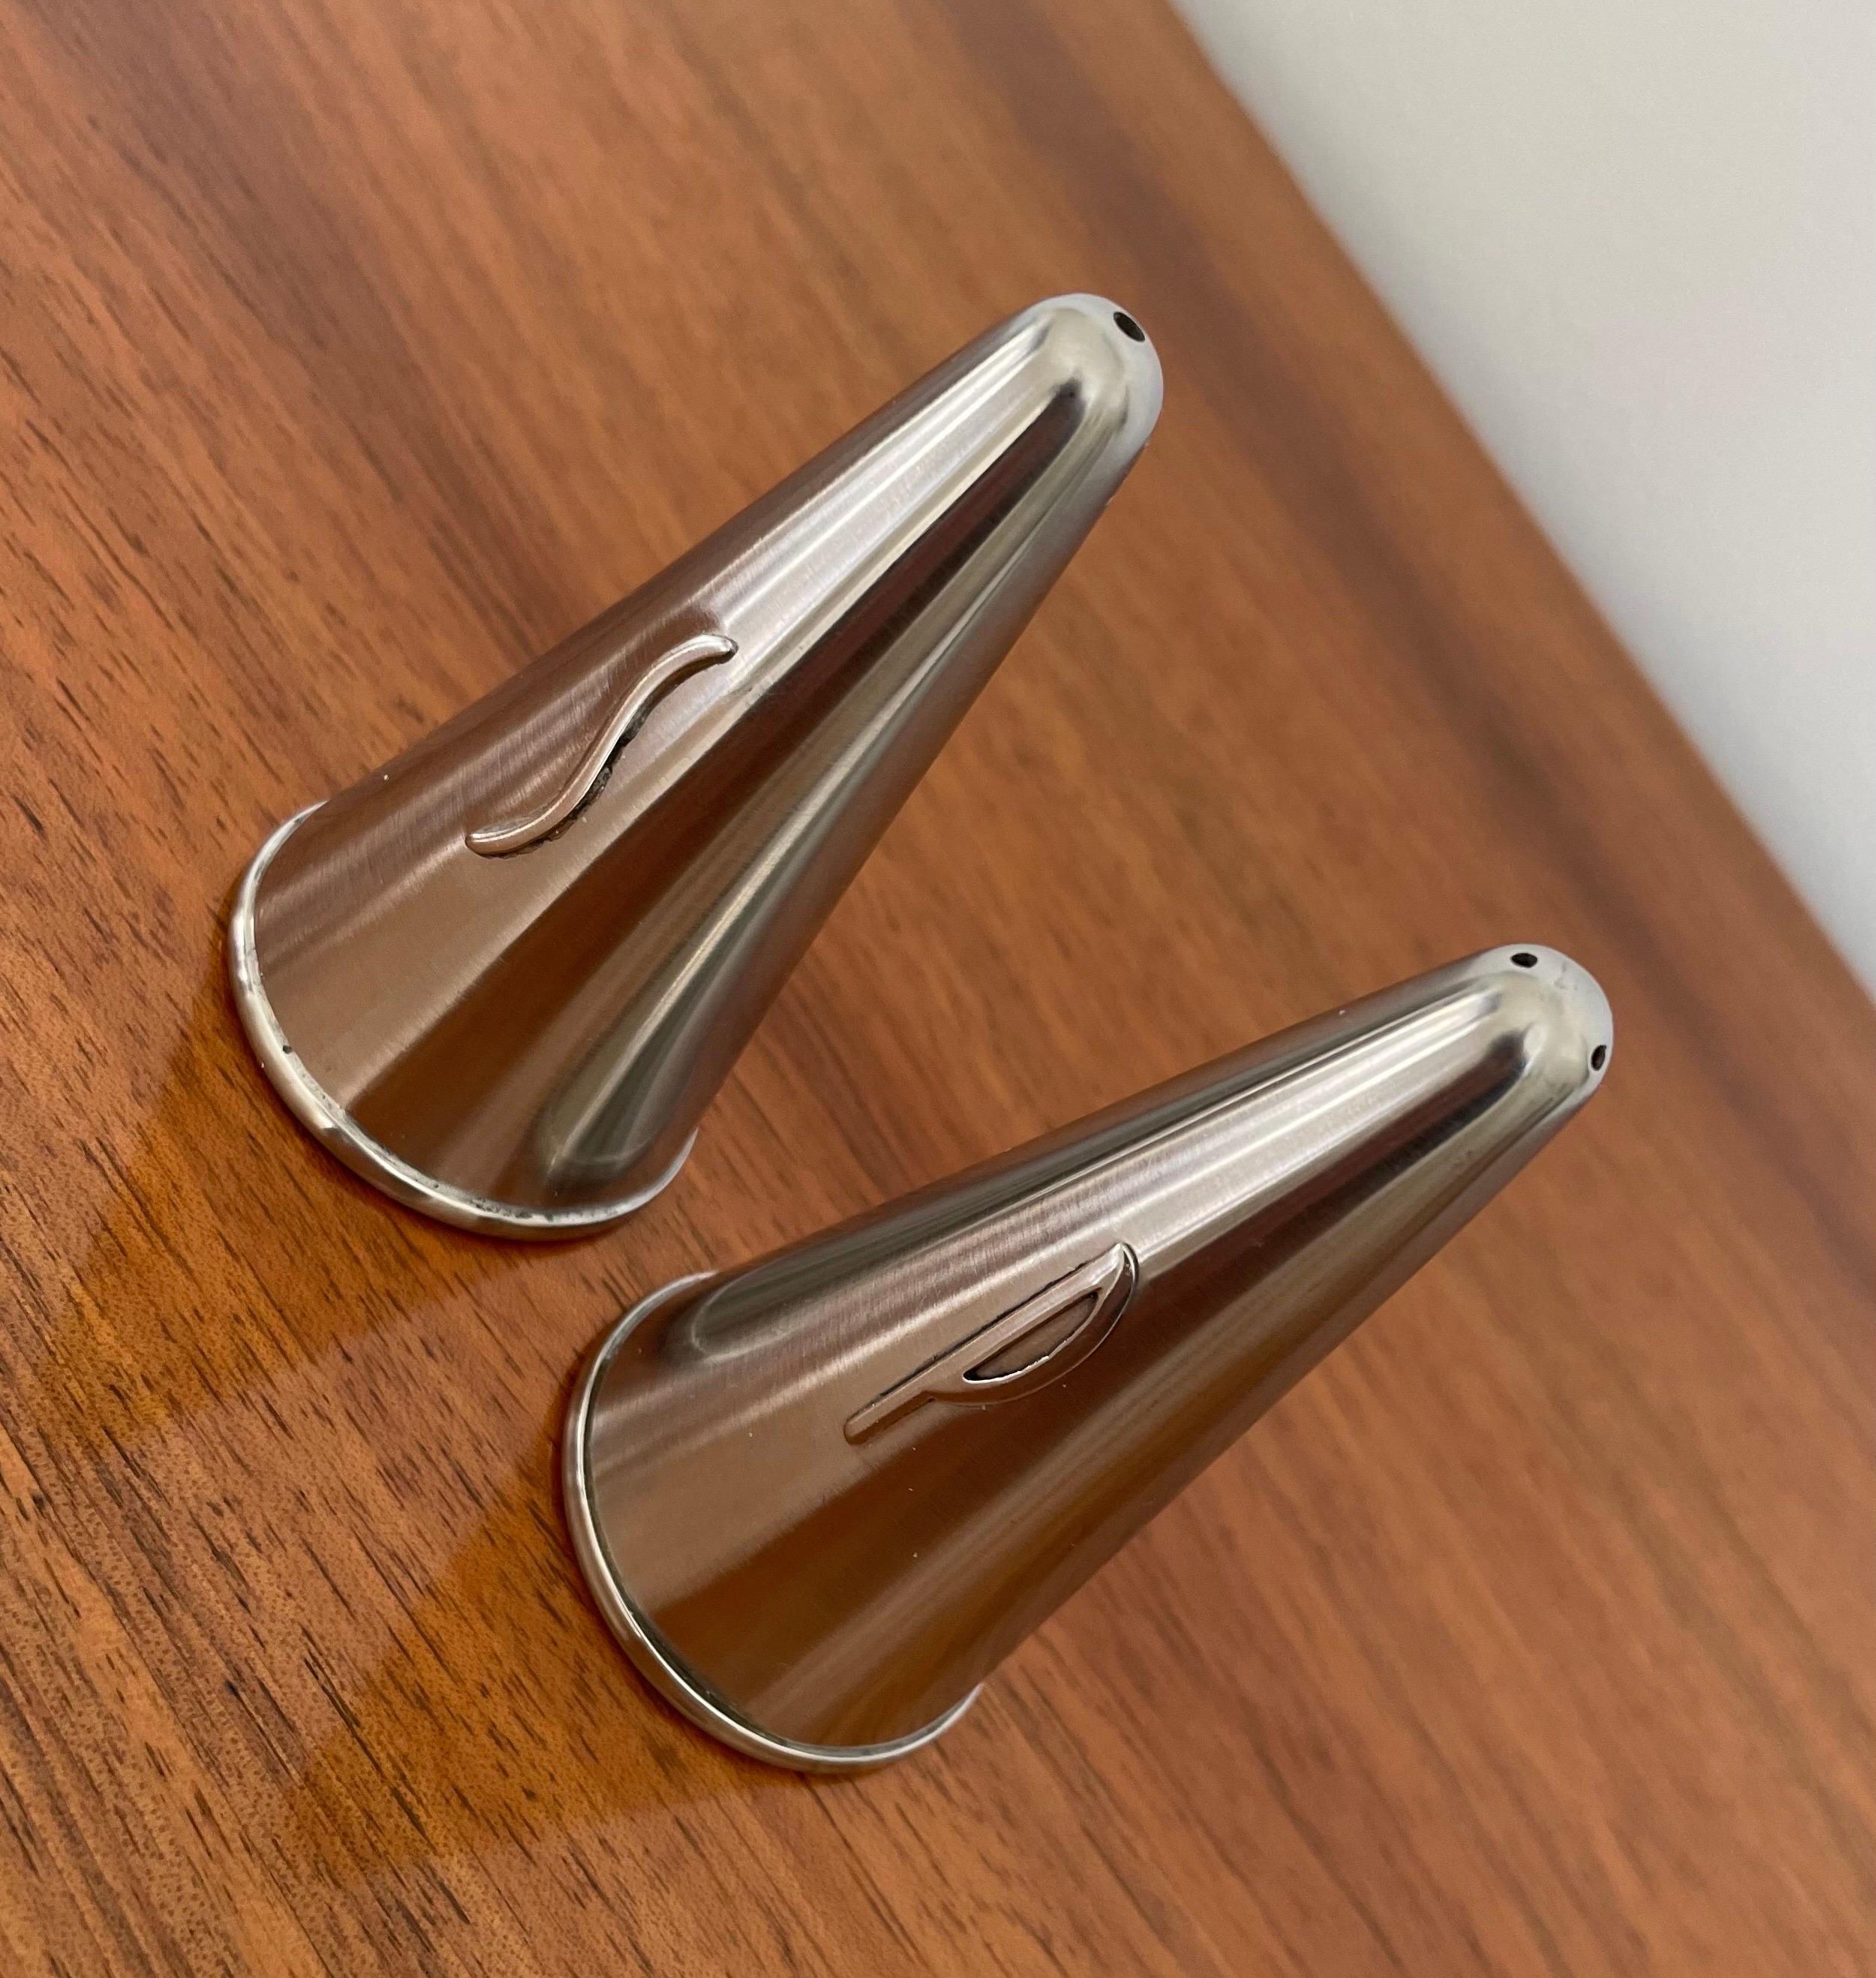 Very cool midcentury salt and pepper shakers made of stainless steel, Denmark.